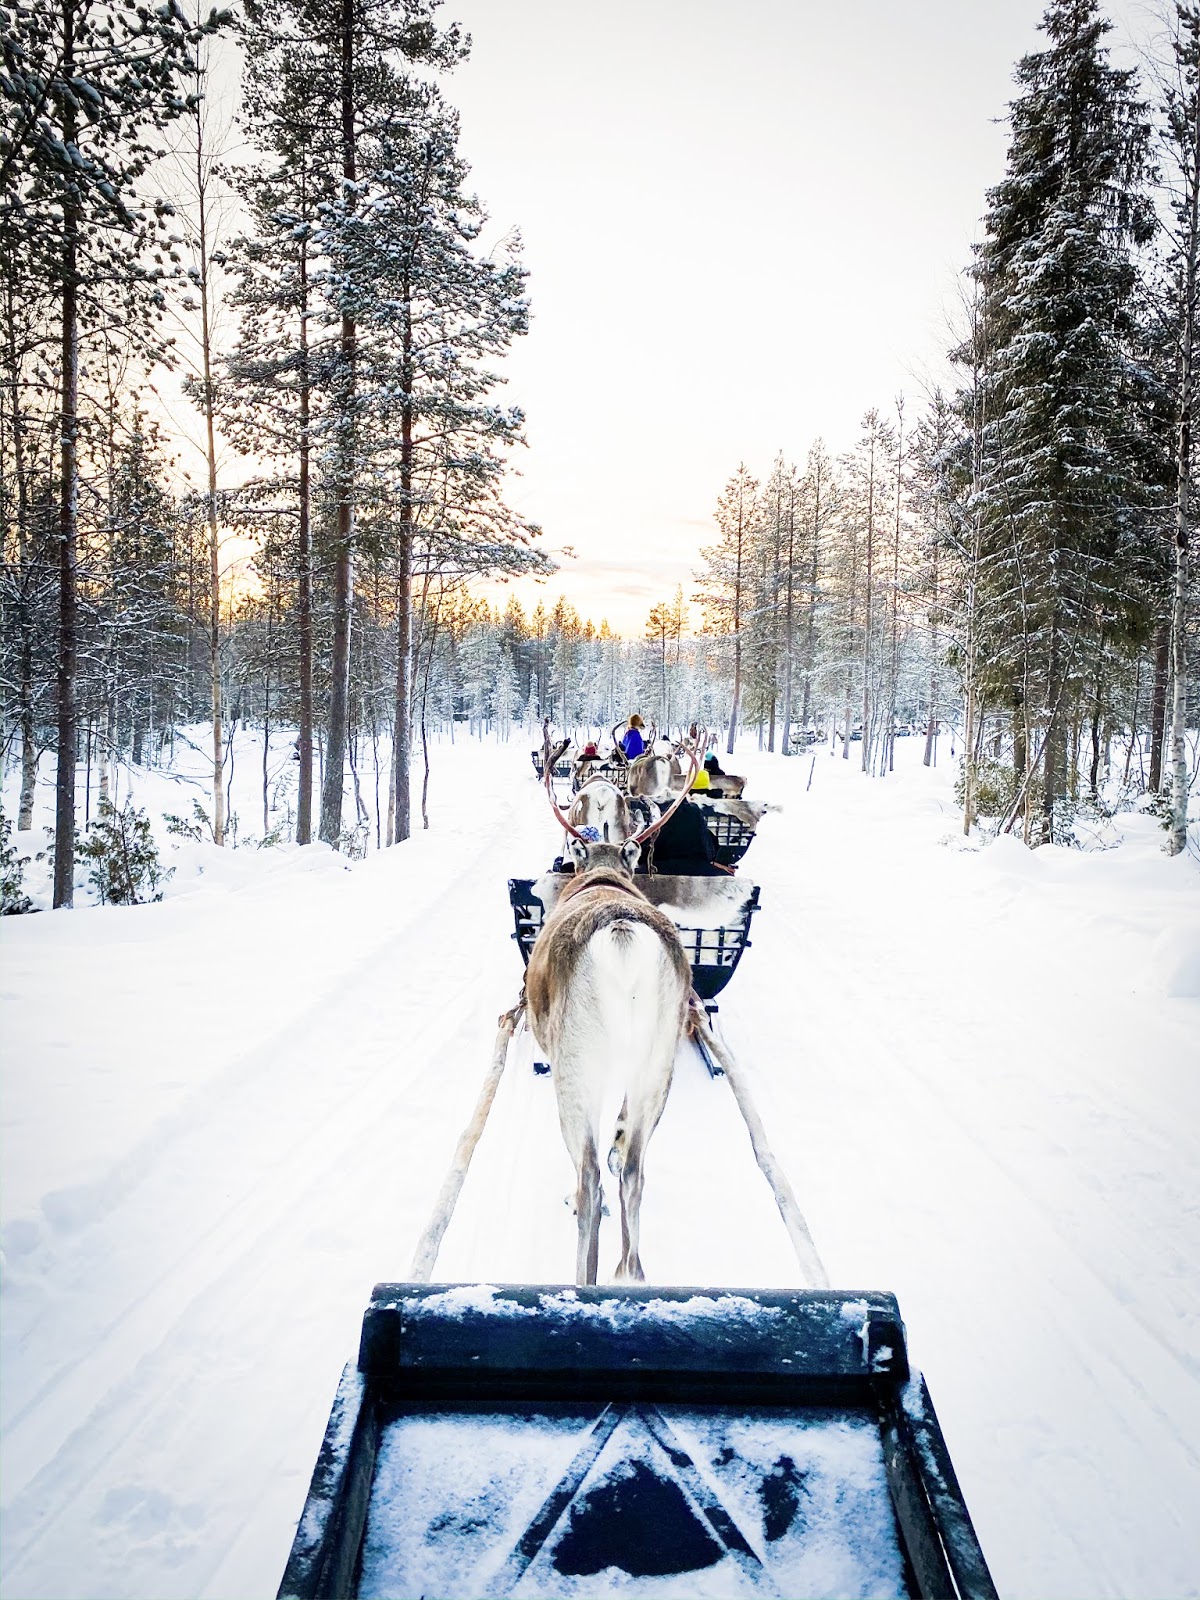 coach trips to lapland uk